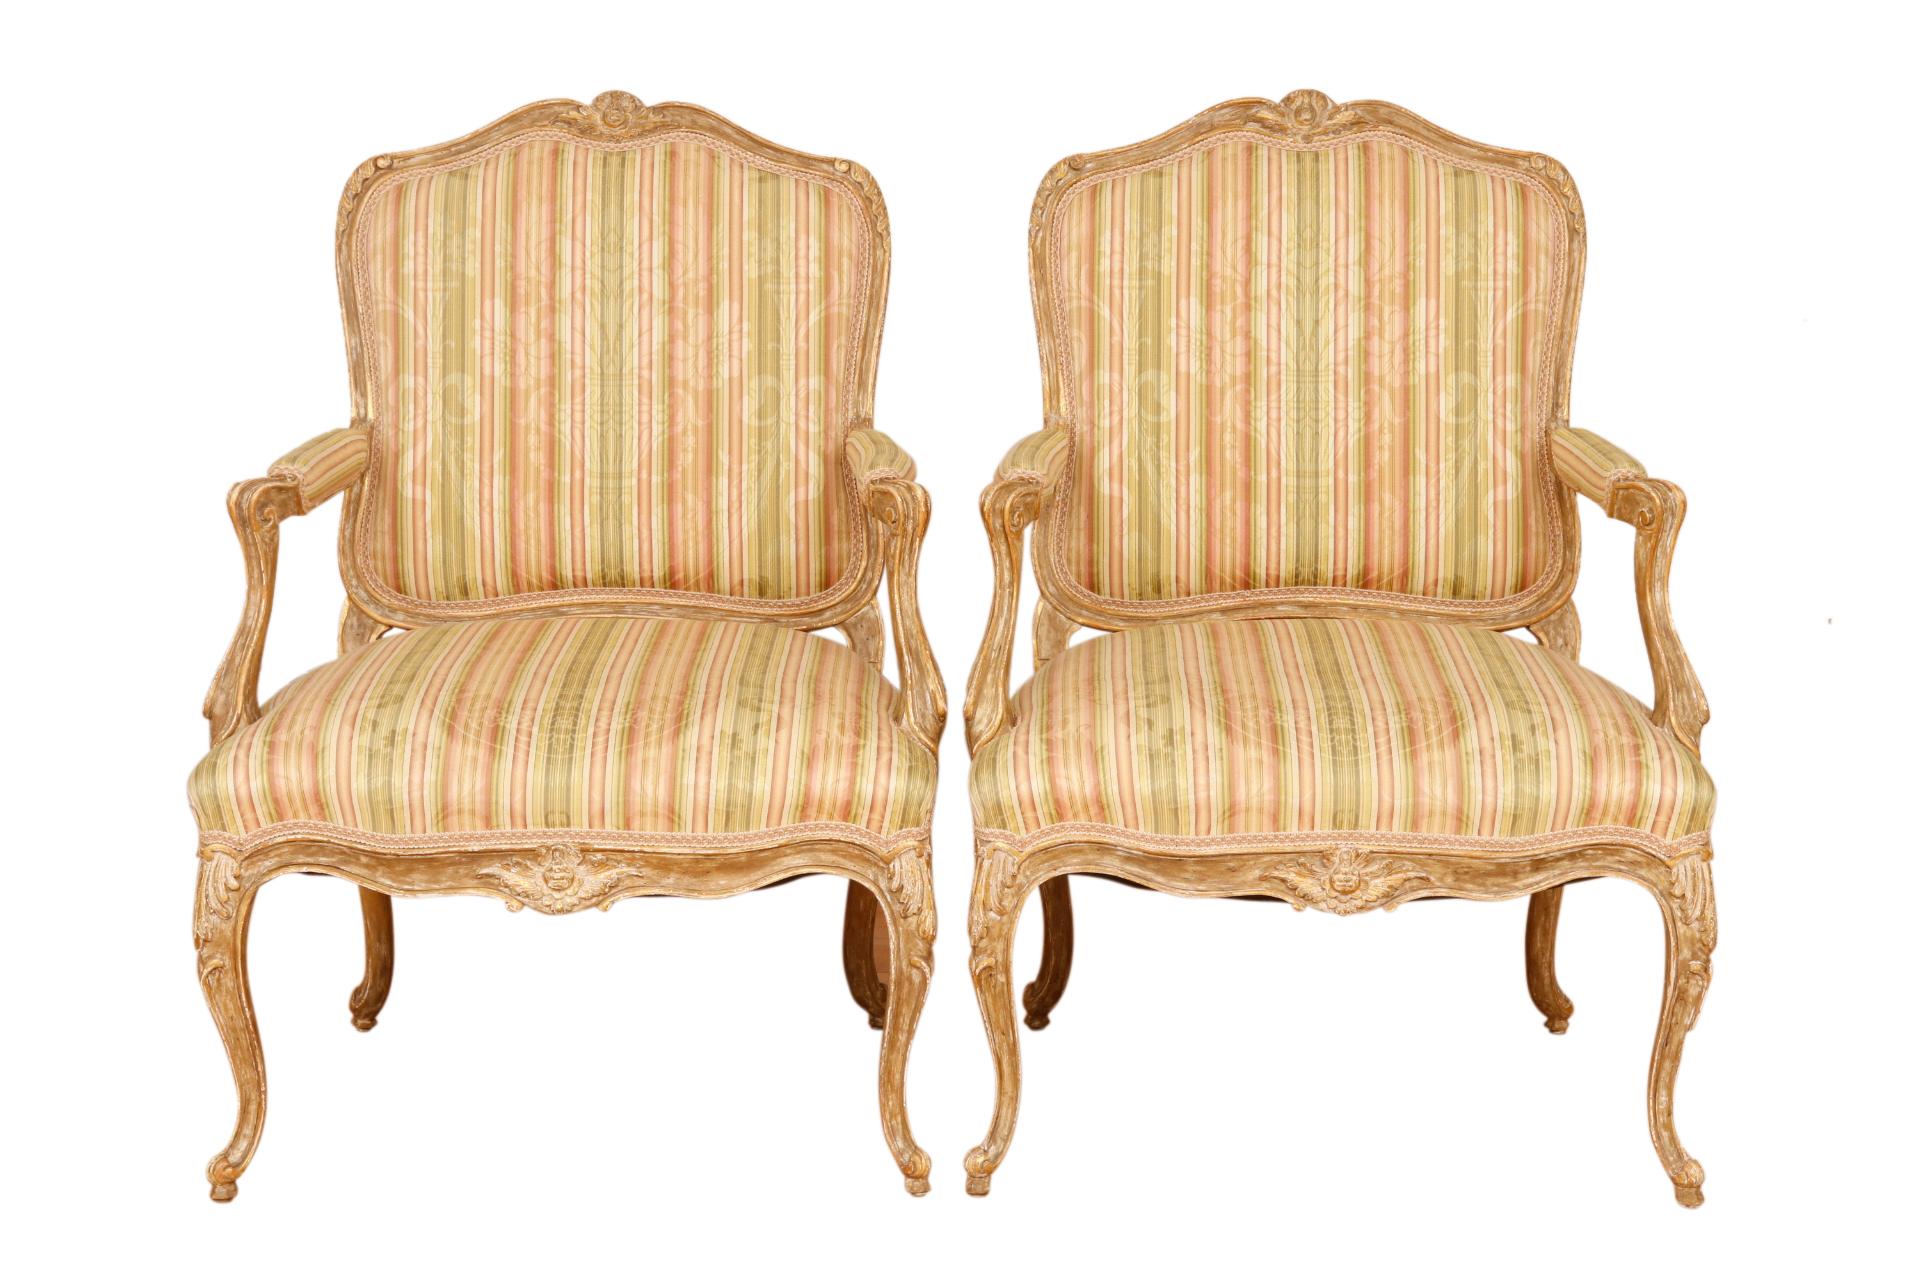 A pair of French Louis XV style fauteuils a la Reine. Seats are upholstered in a silken striped brocade secured with braided gimp. A classical floral vase and ribbon motif is superimposed over vertical stripes in sage, blush and cream. In the back